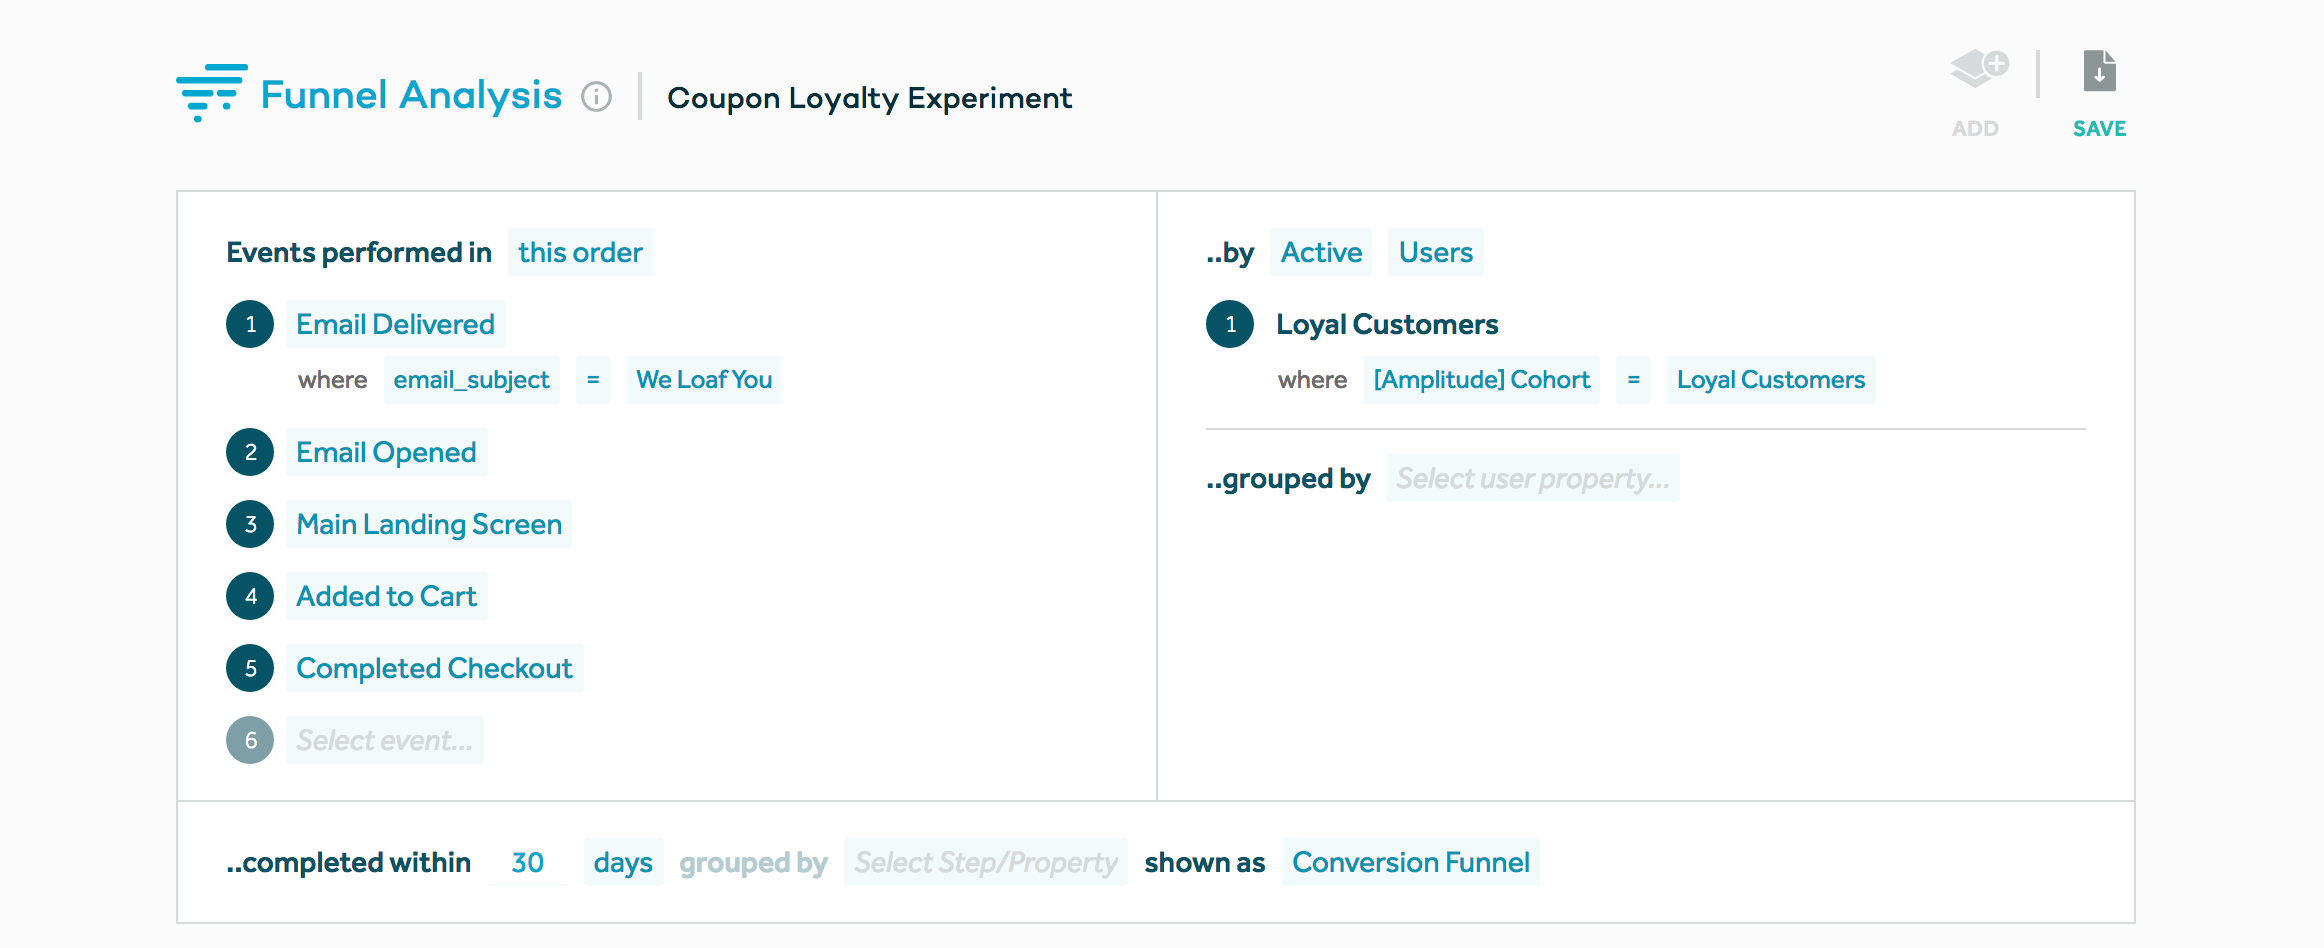 Screenshot of the Funnel Analysis page in Amplitude showing the Loyal Customers segment.